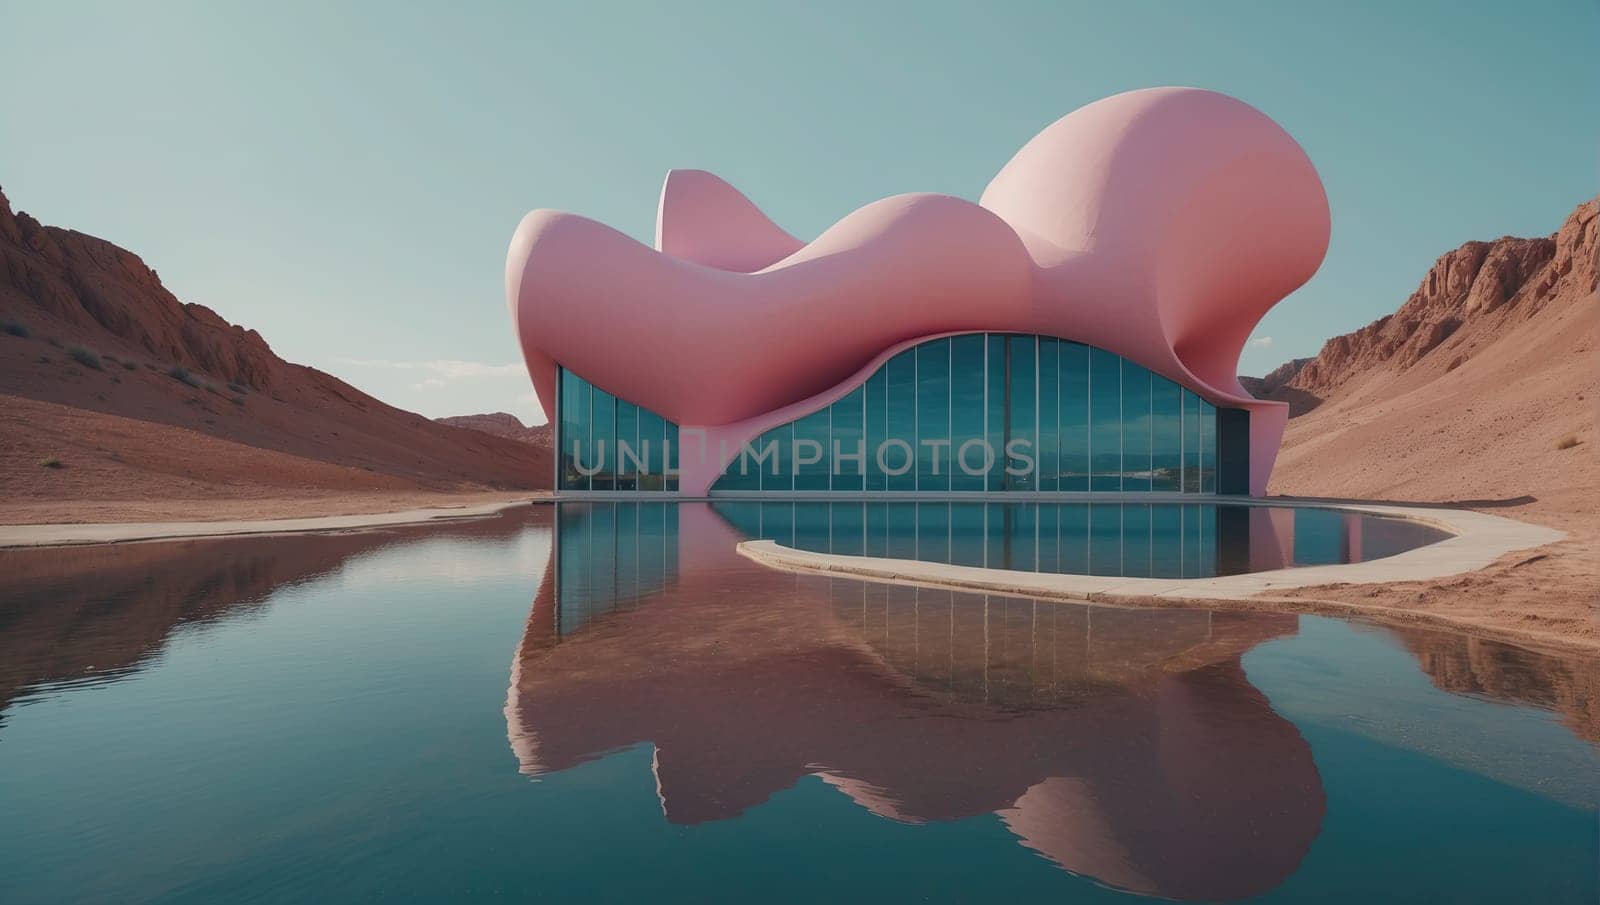 Futuristic building in the desert by applesstock